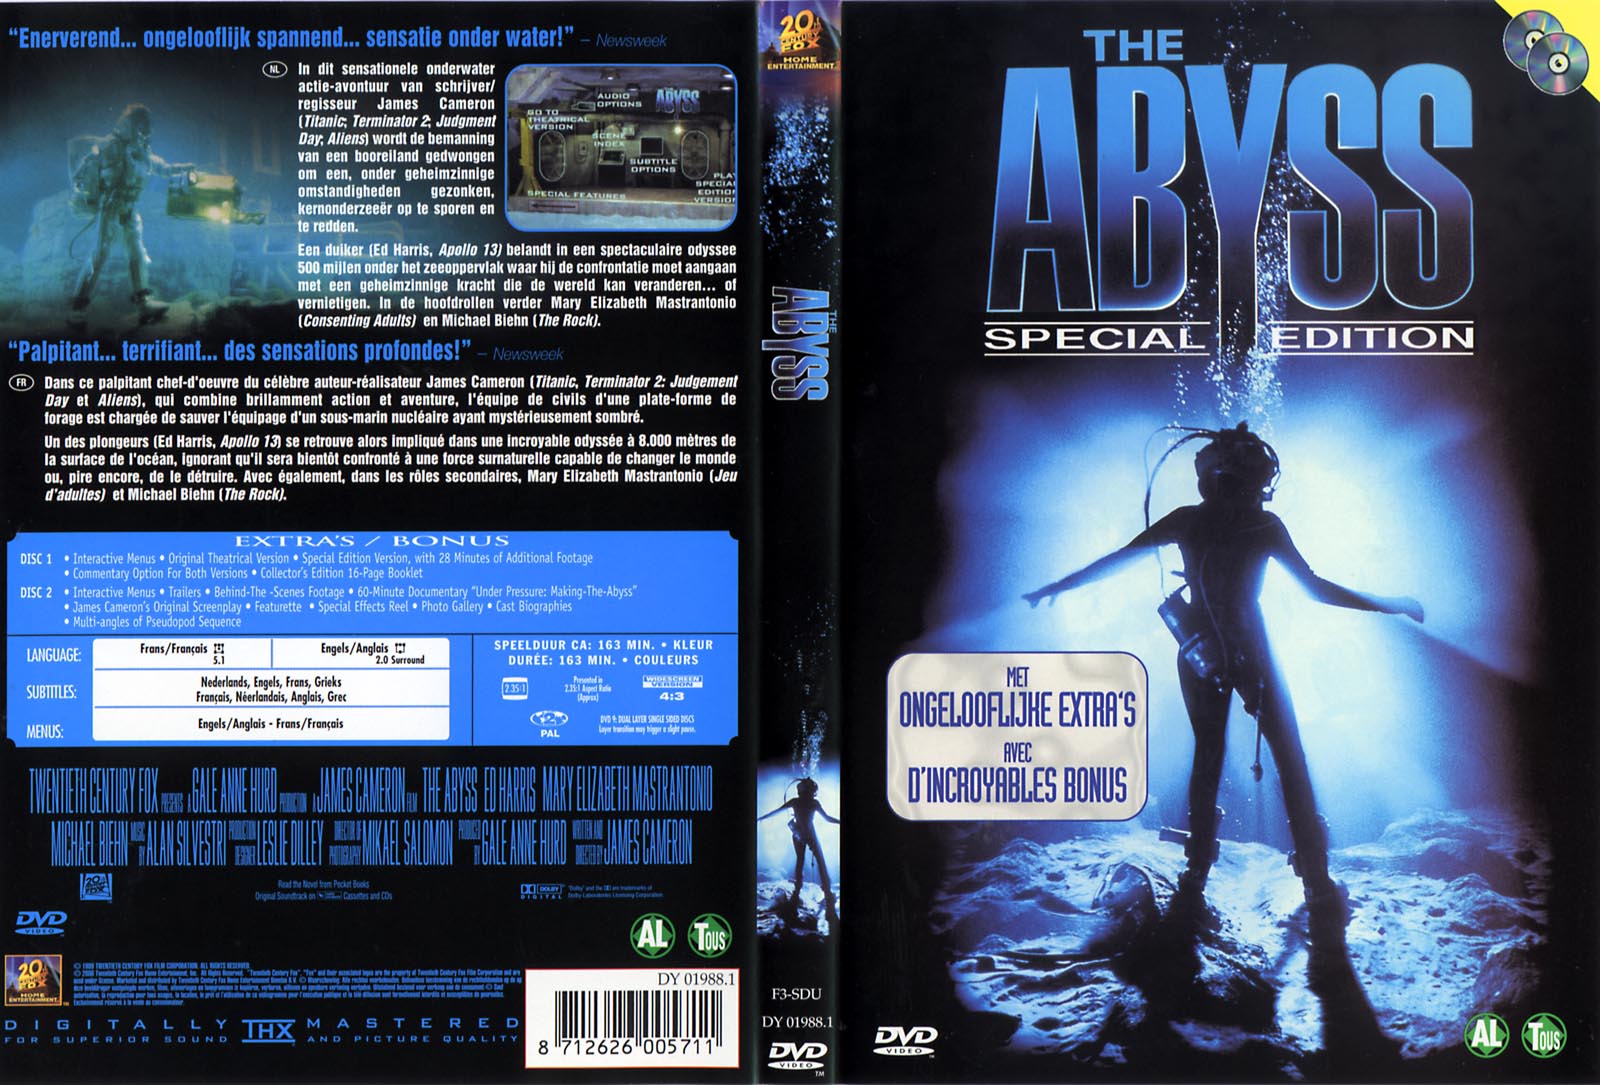 The abyss (Special edition)